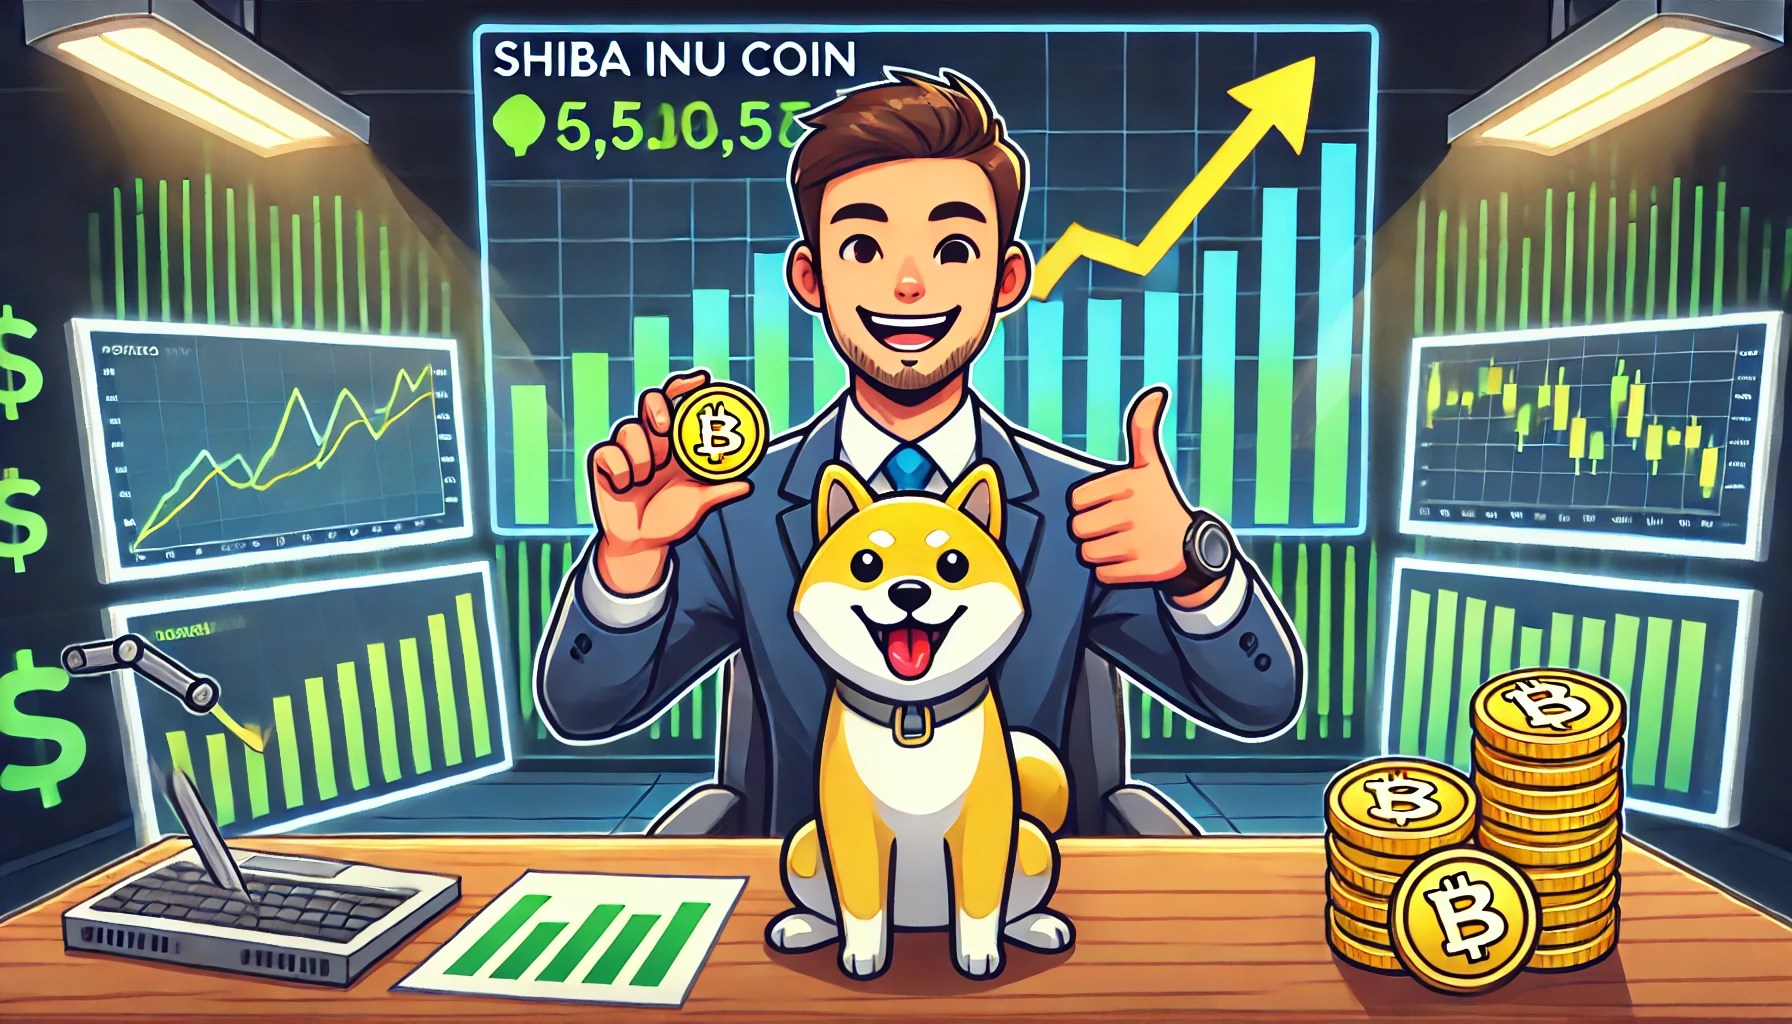 Shiba Inu Investor Makes More Than $6 Million In Profit, Here’s How They Did It